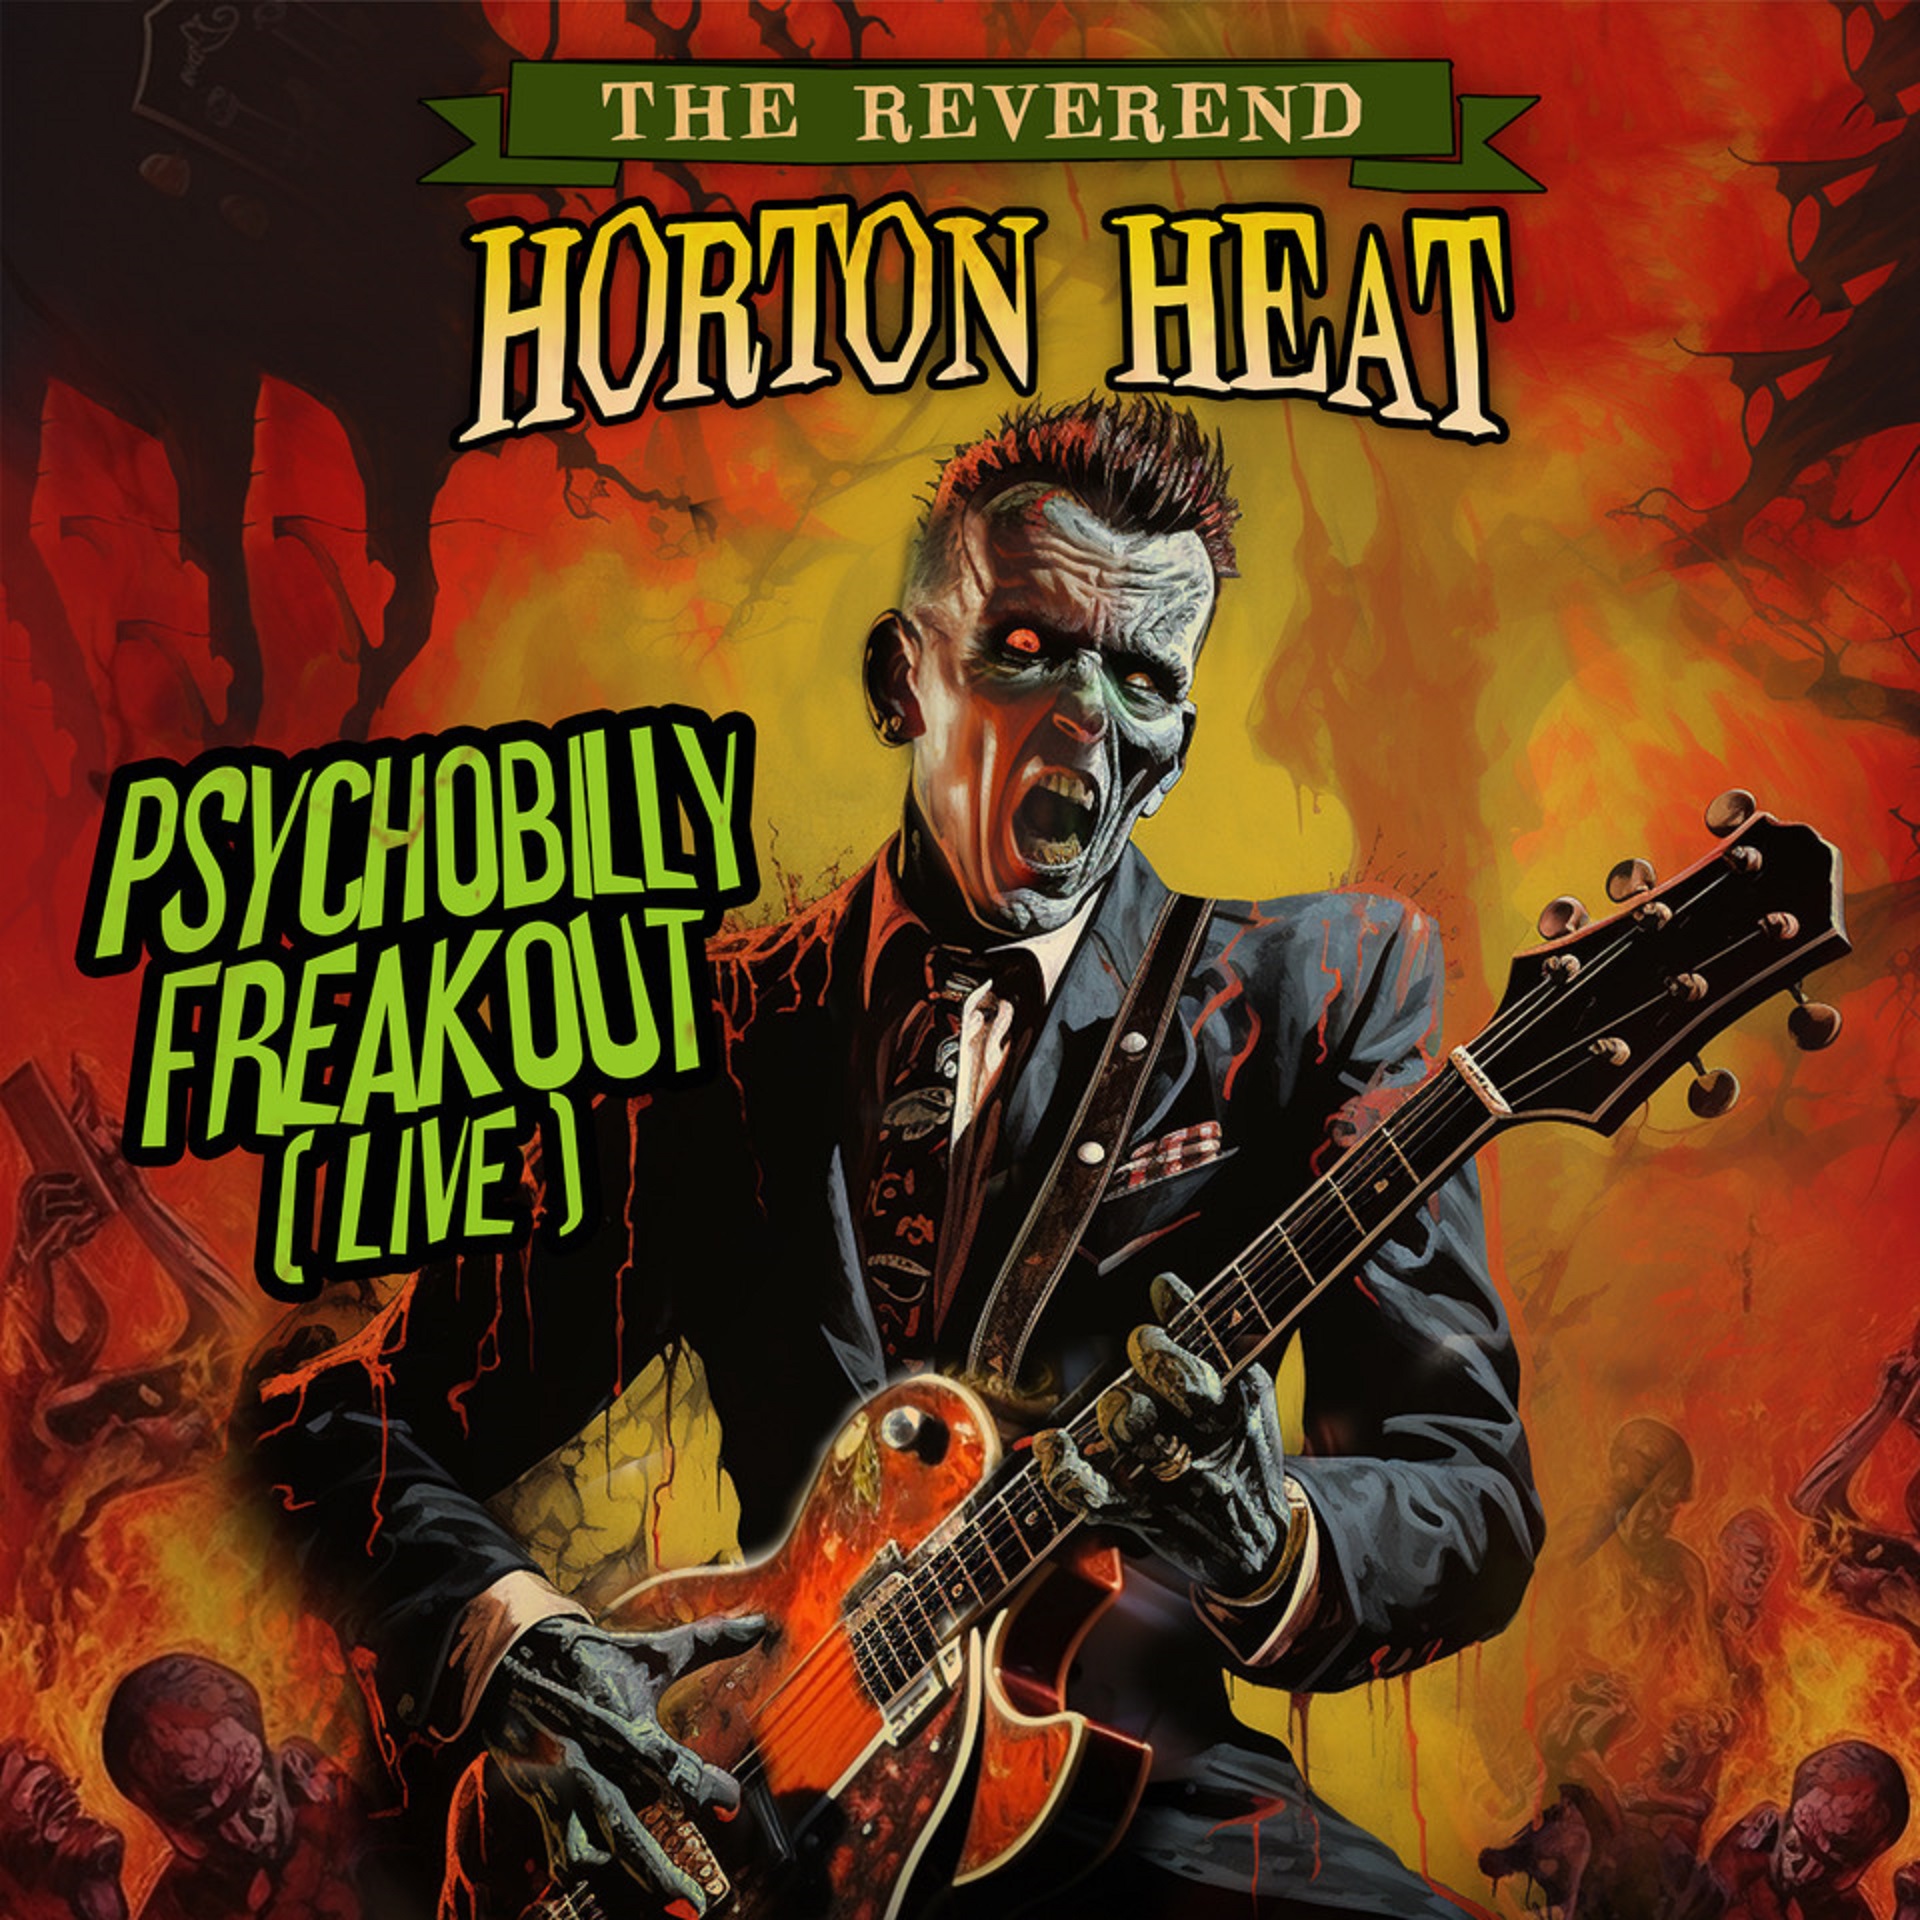 The Reverend Horton Heat To Bring Their Psychobilly Stylings with the Release of CD/DVD Live Album LIVE IN HOUSTON